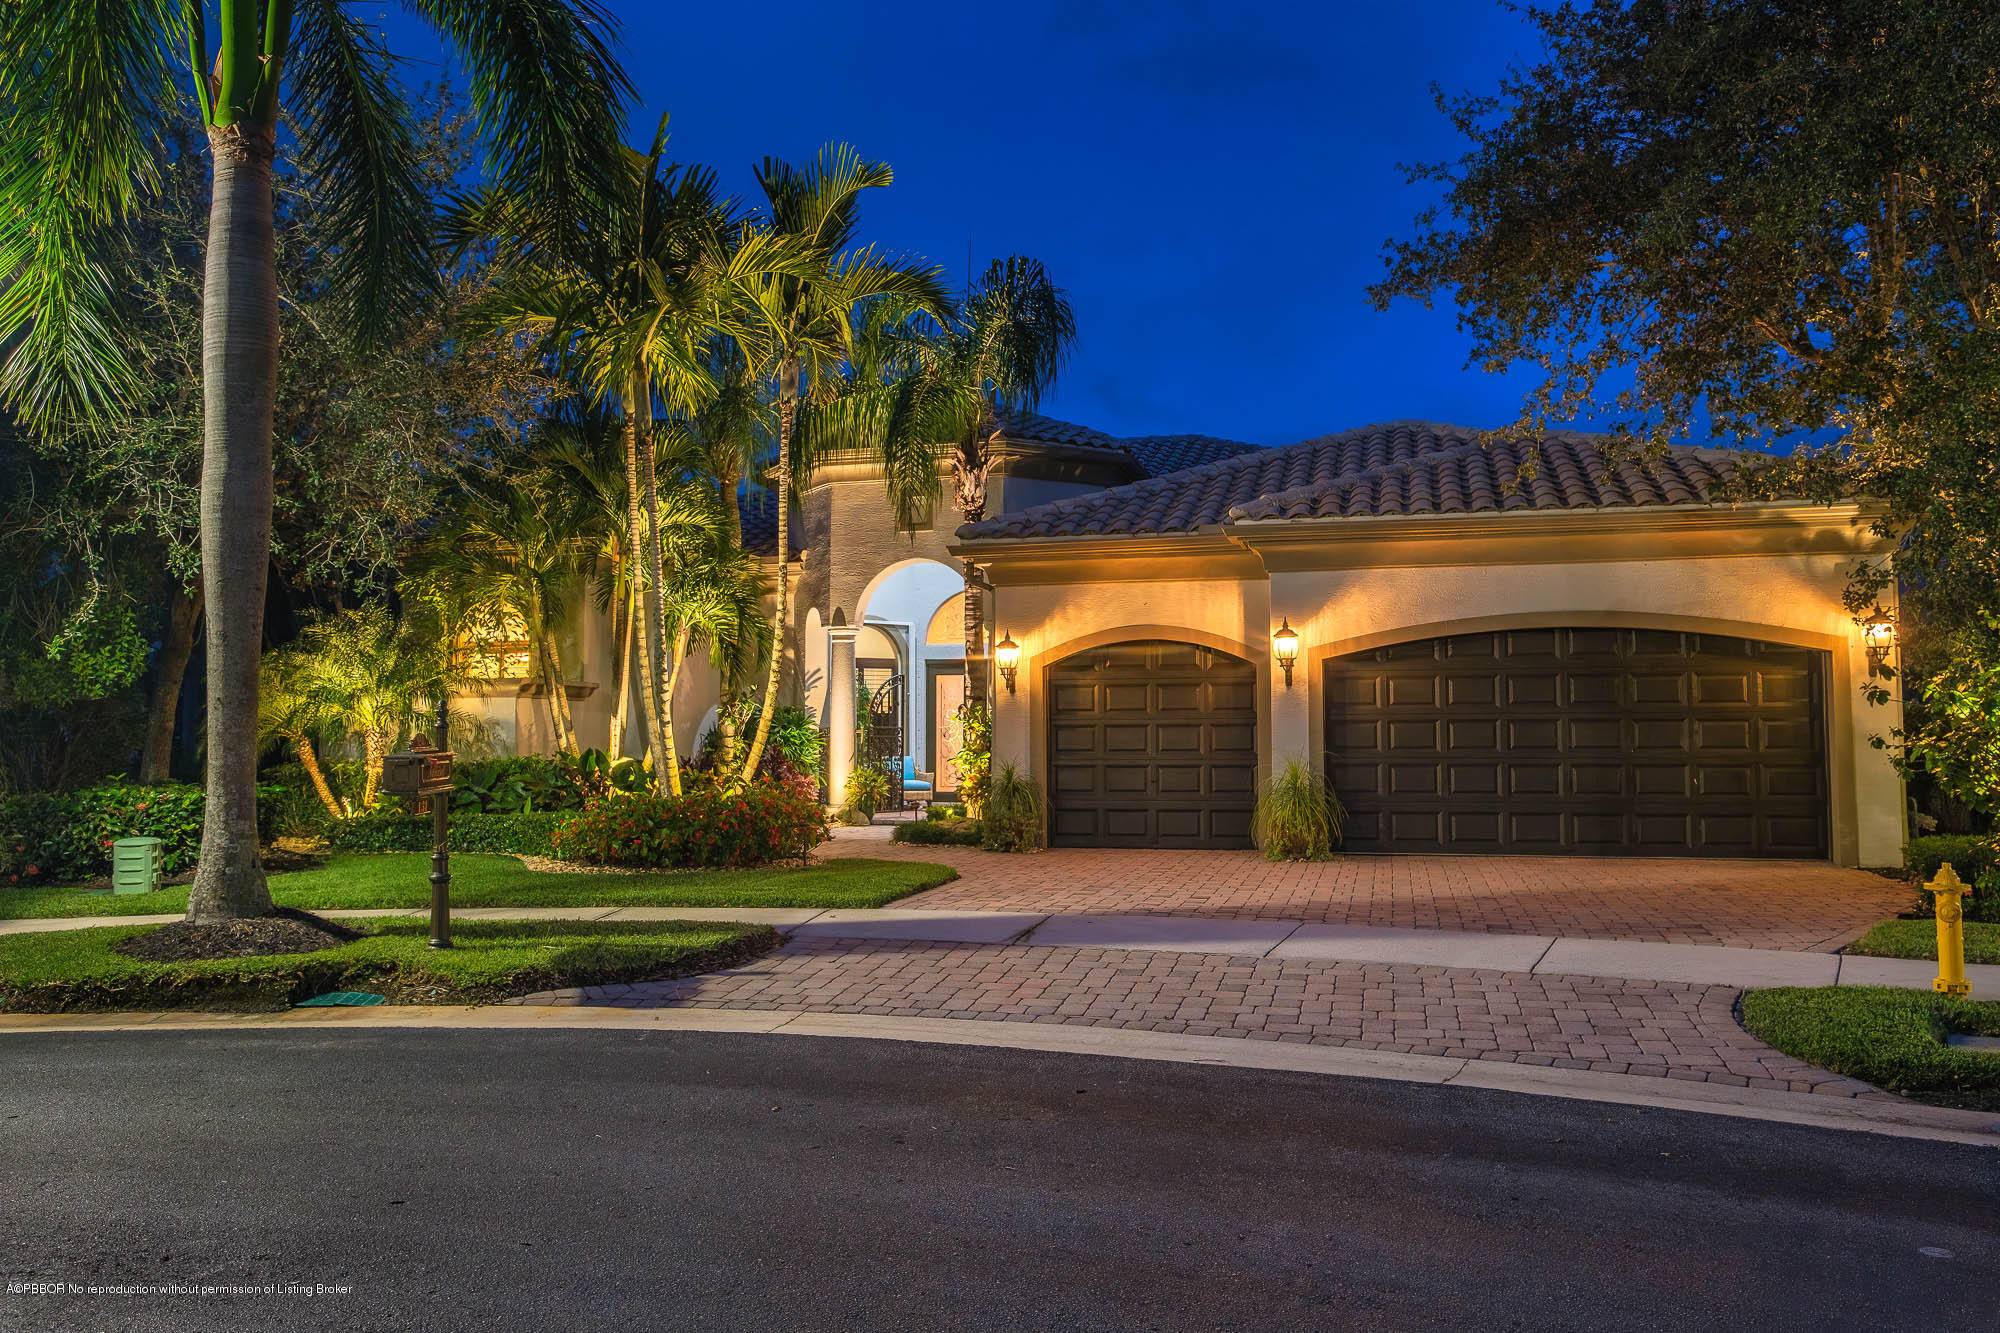 Rarely does one have the chance to purchase such a magnificent lake front estate, located on a cul de sac in the prestigious Country Club at Mirasol.